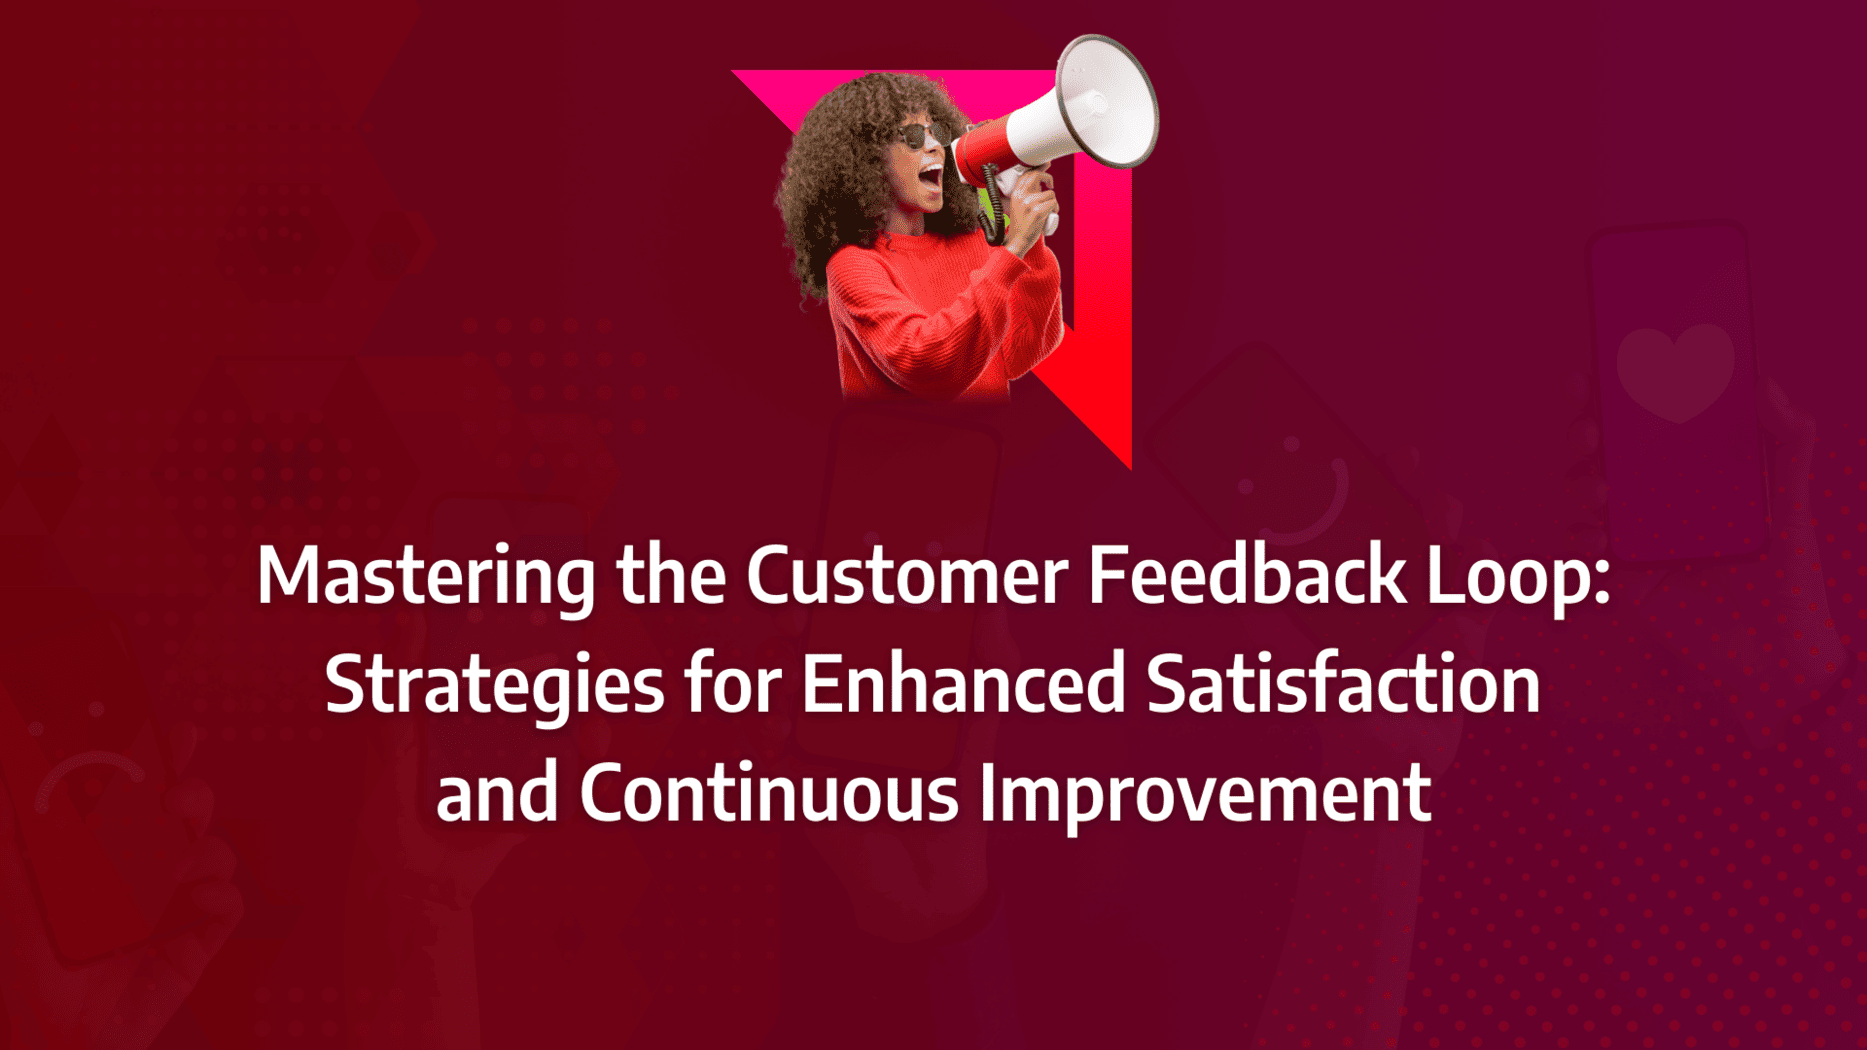 Customer feedback loop: enhanced through strategic implementation, practical examples, integrated feedback systems, and effective customer service loops for continuous improvement and customer satisfaction.: strategy framework diagram for implement a customer feedback loop, feedback loop examples, customer feedback system, customer service loop